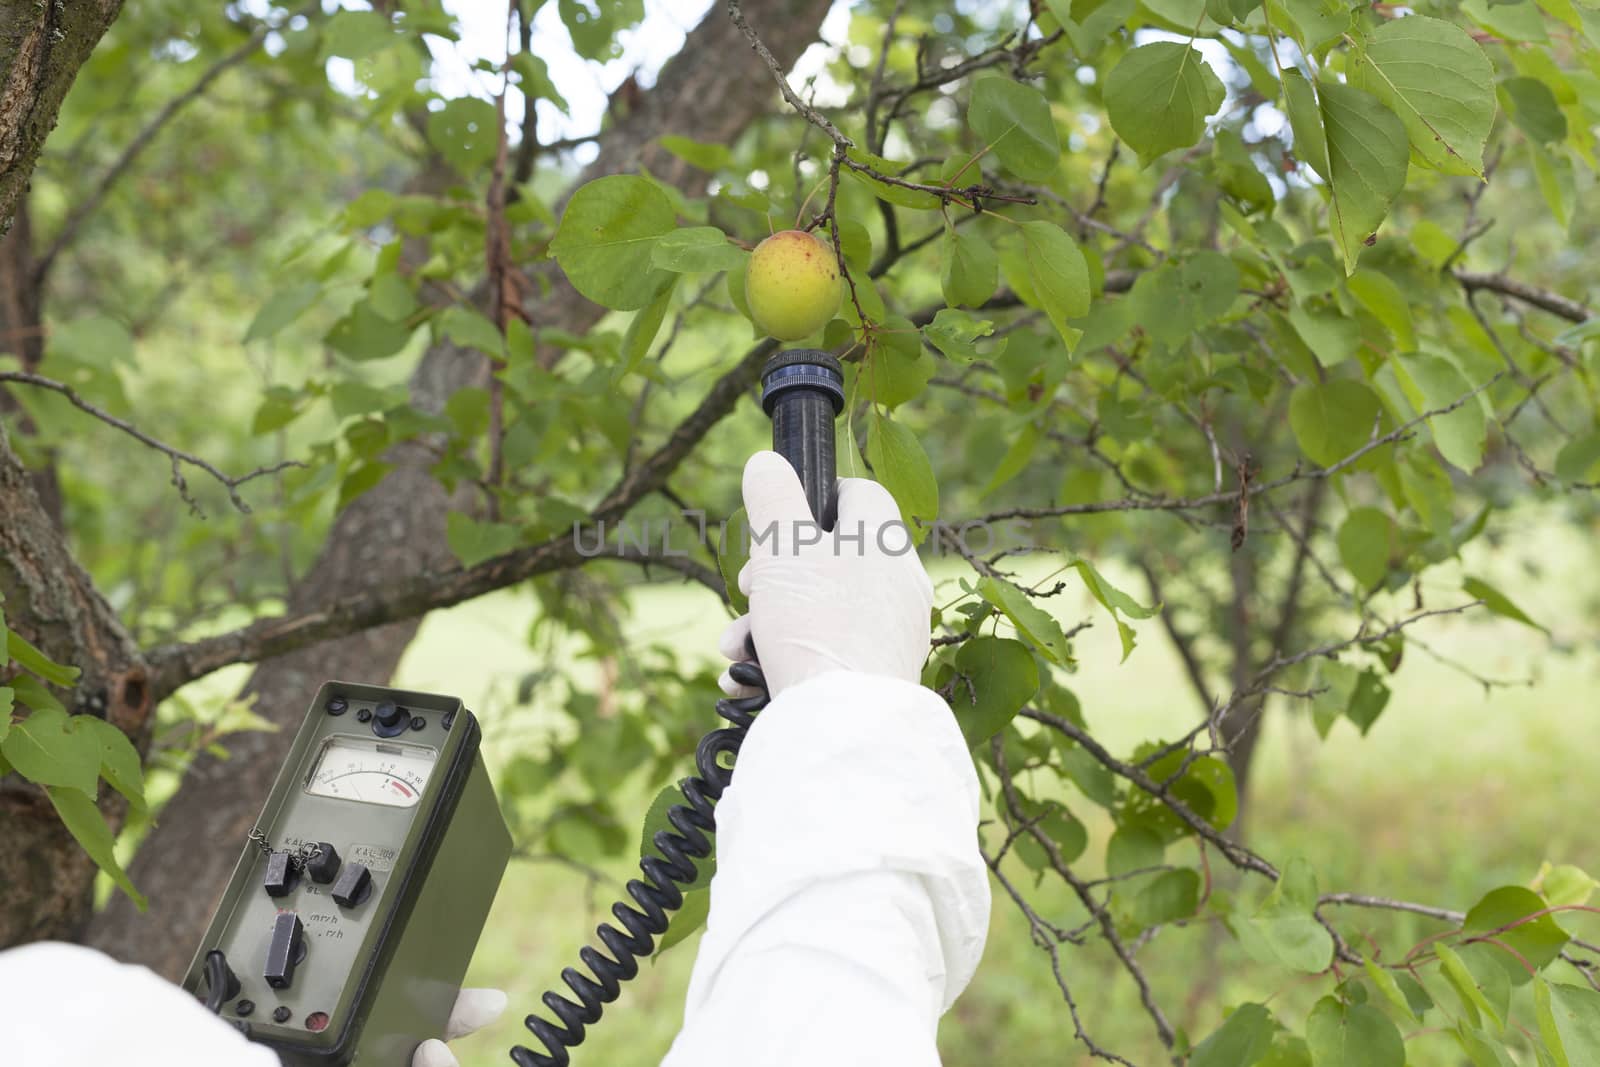 Measuring radiation levels of fruits by wellphoto